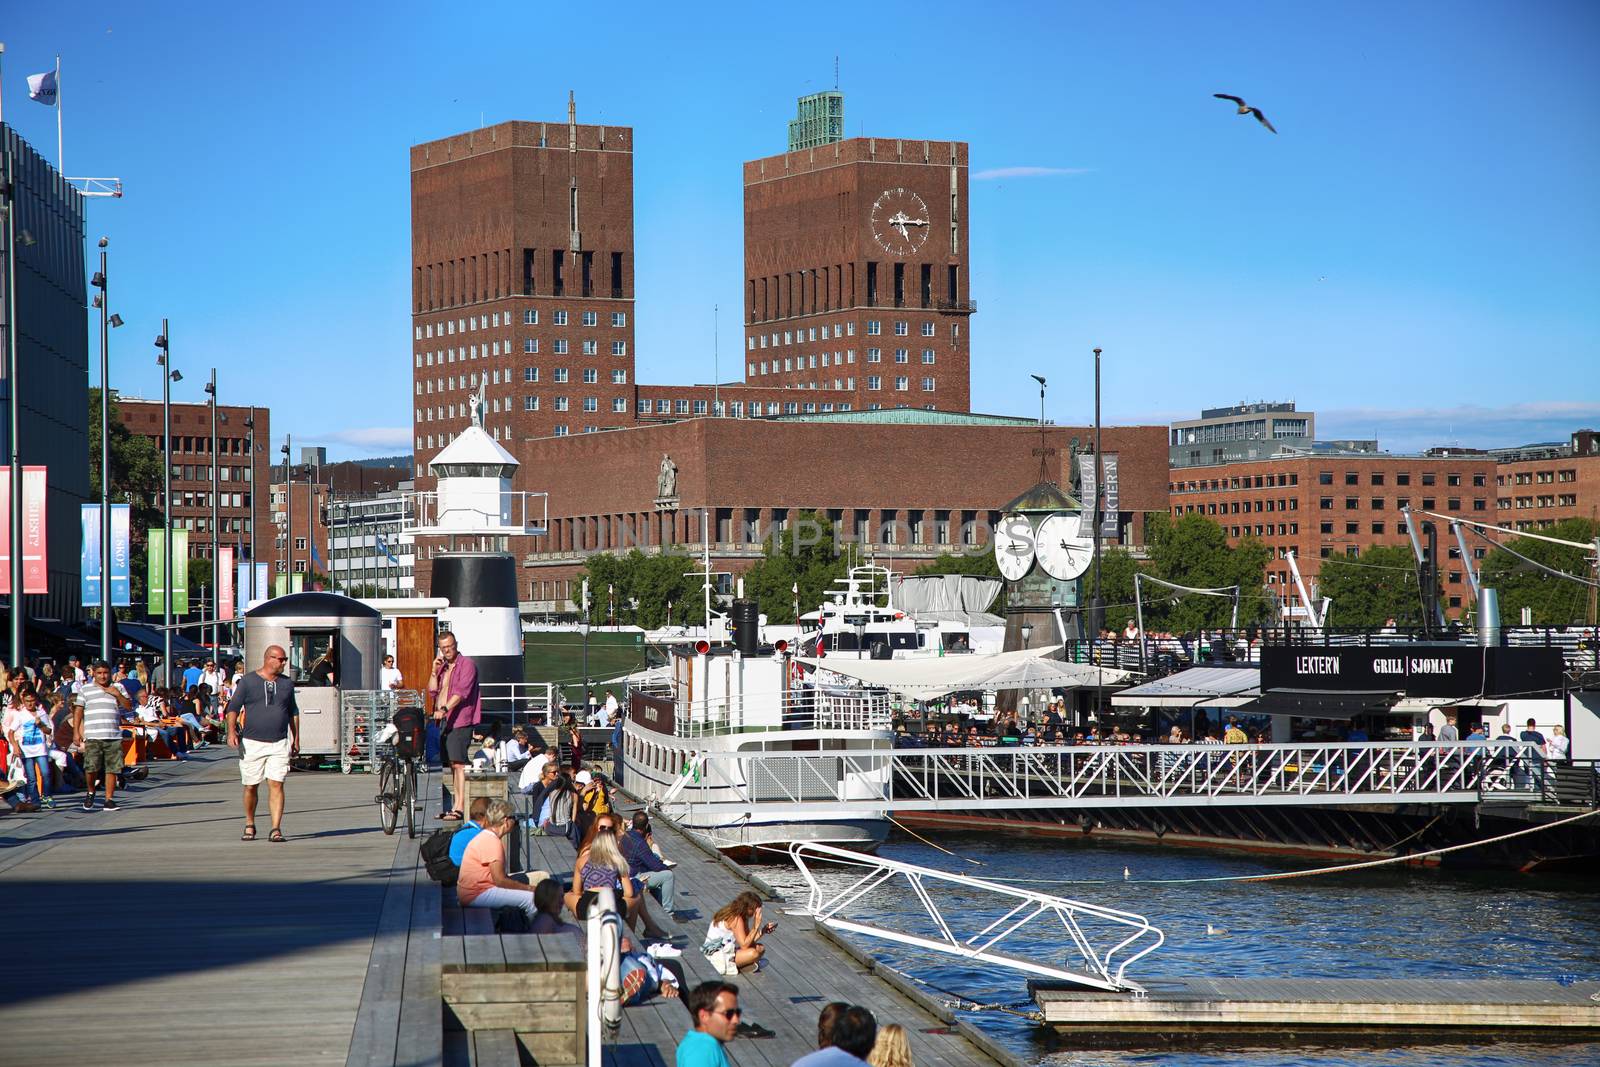 OSLO, NORWAY – AUGUST 17, 2016: People walking on modern district on street Stranden, Aker Brygge district and in the background is the City Hall in Oslo, Norway on August 17,2016.